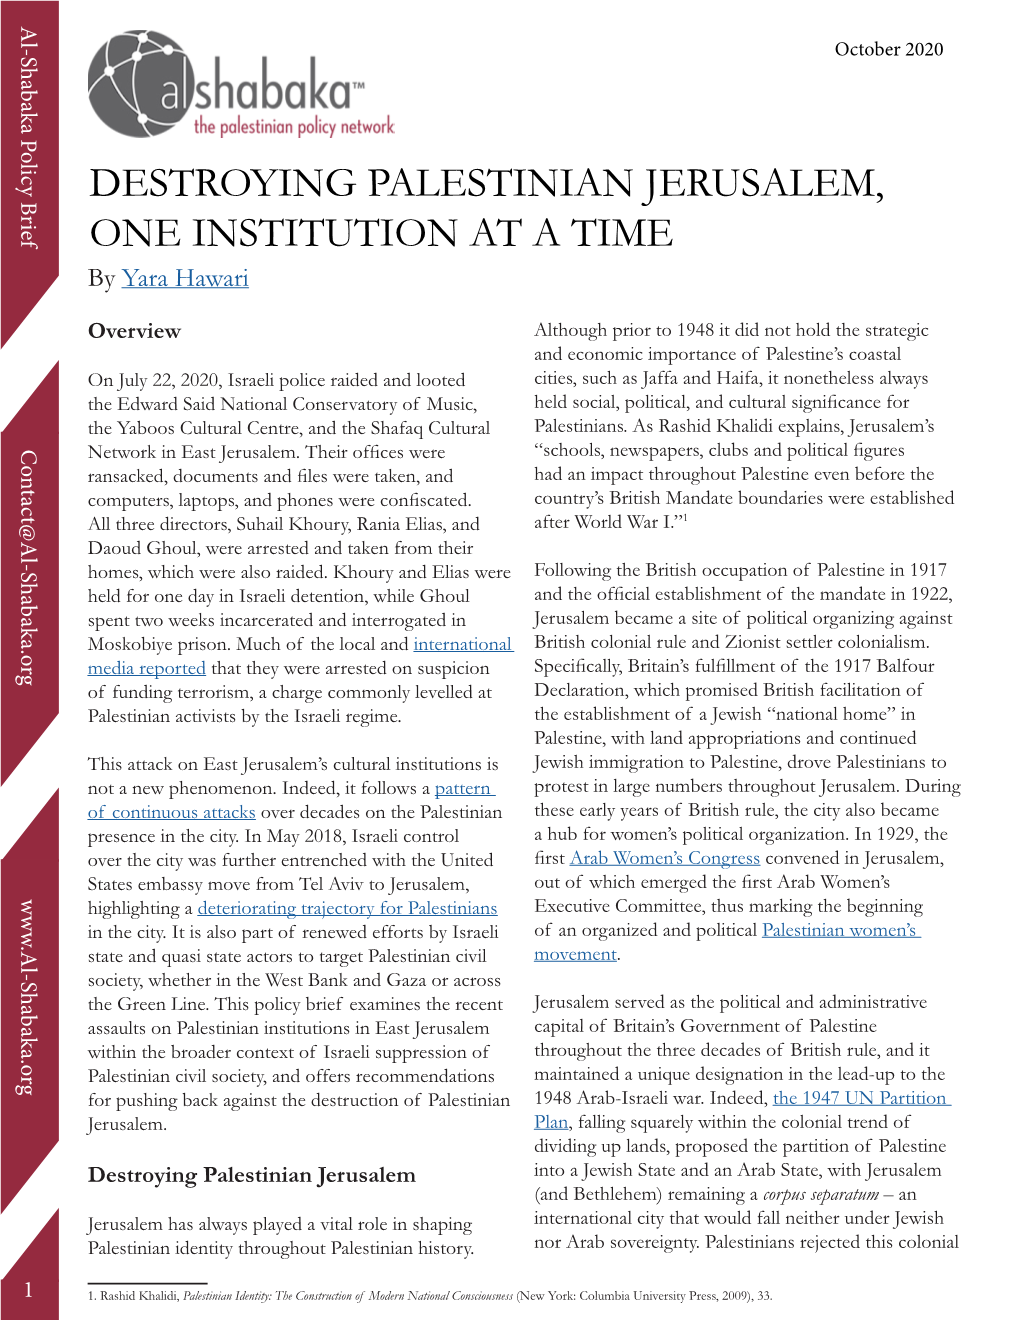 DESTROYING PALESTINIAN JERUSALEM, ONE INSTITUTION at a TIME by Yara Hawari